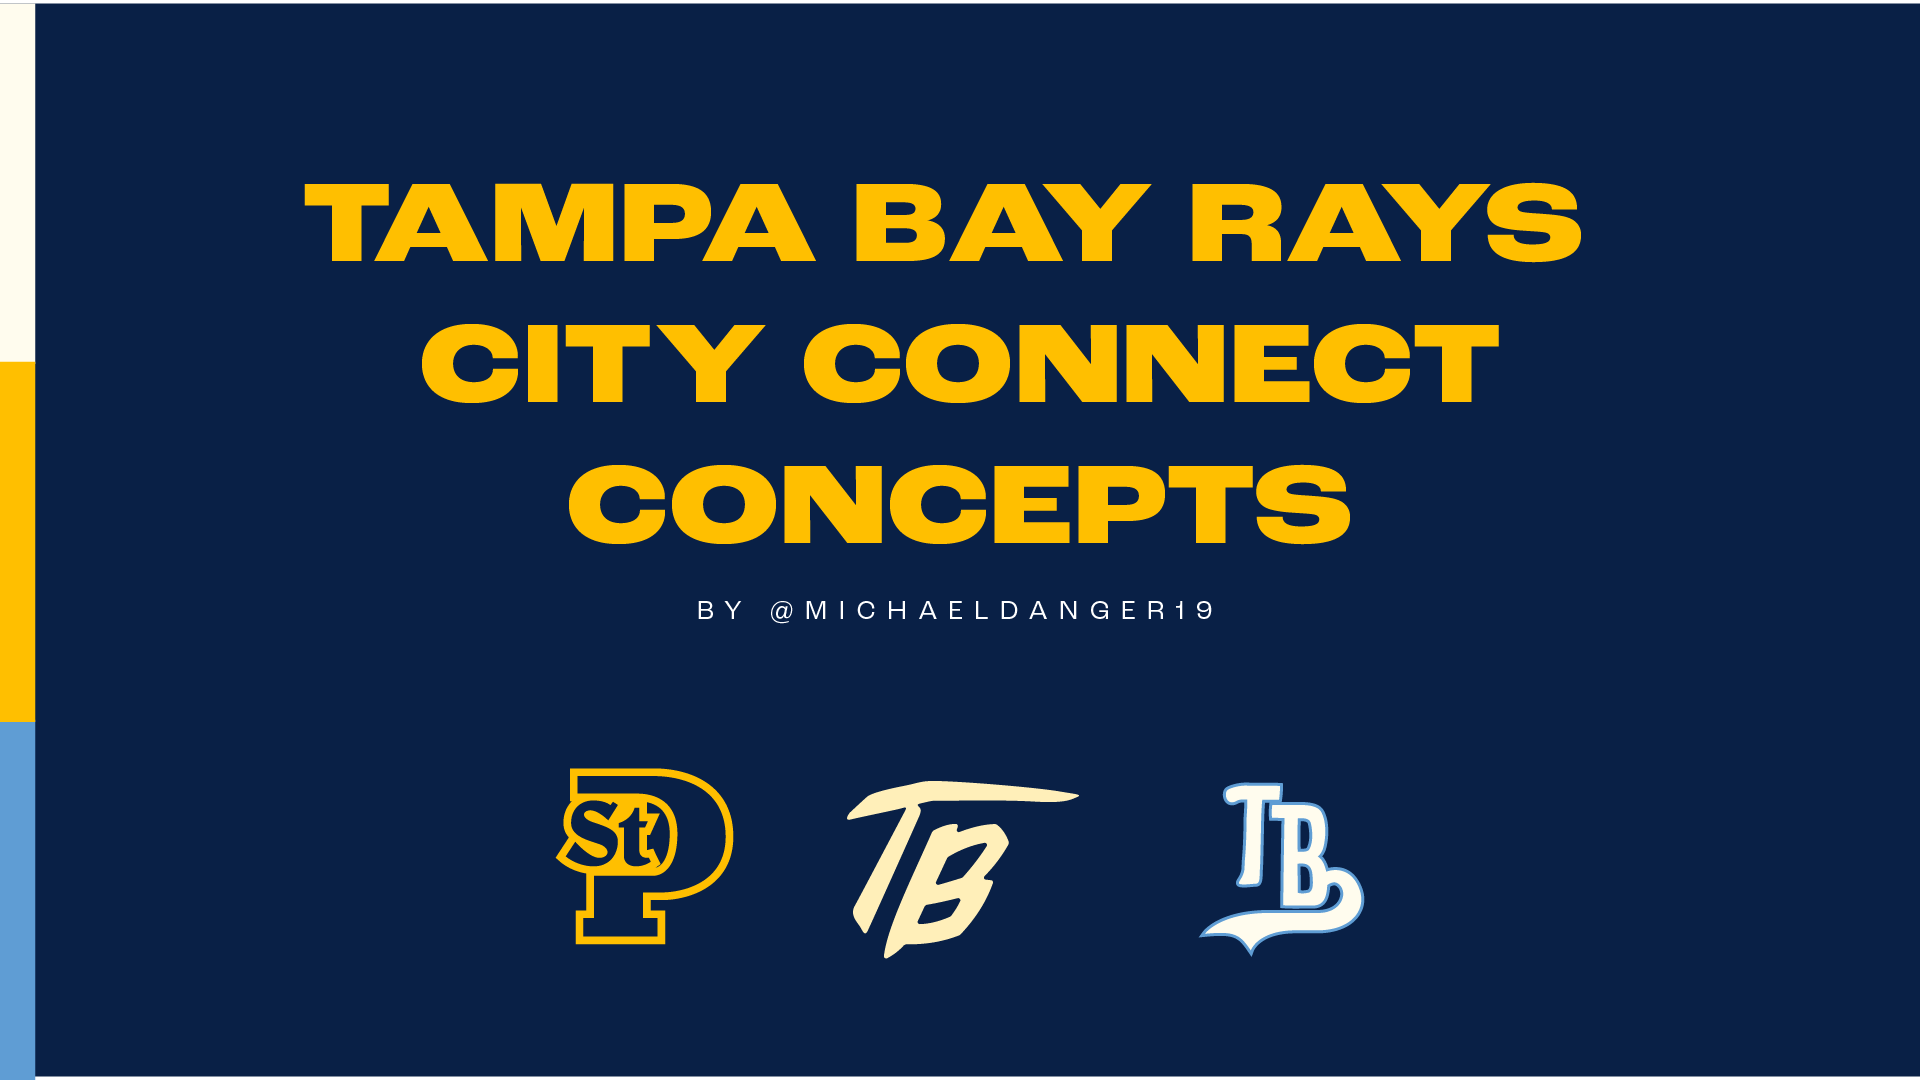 tampa bay rays city connect hat